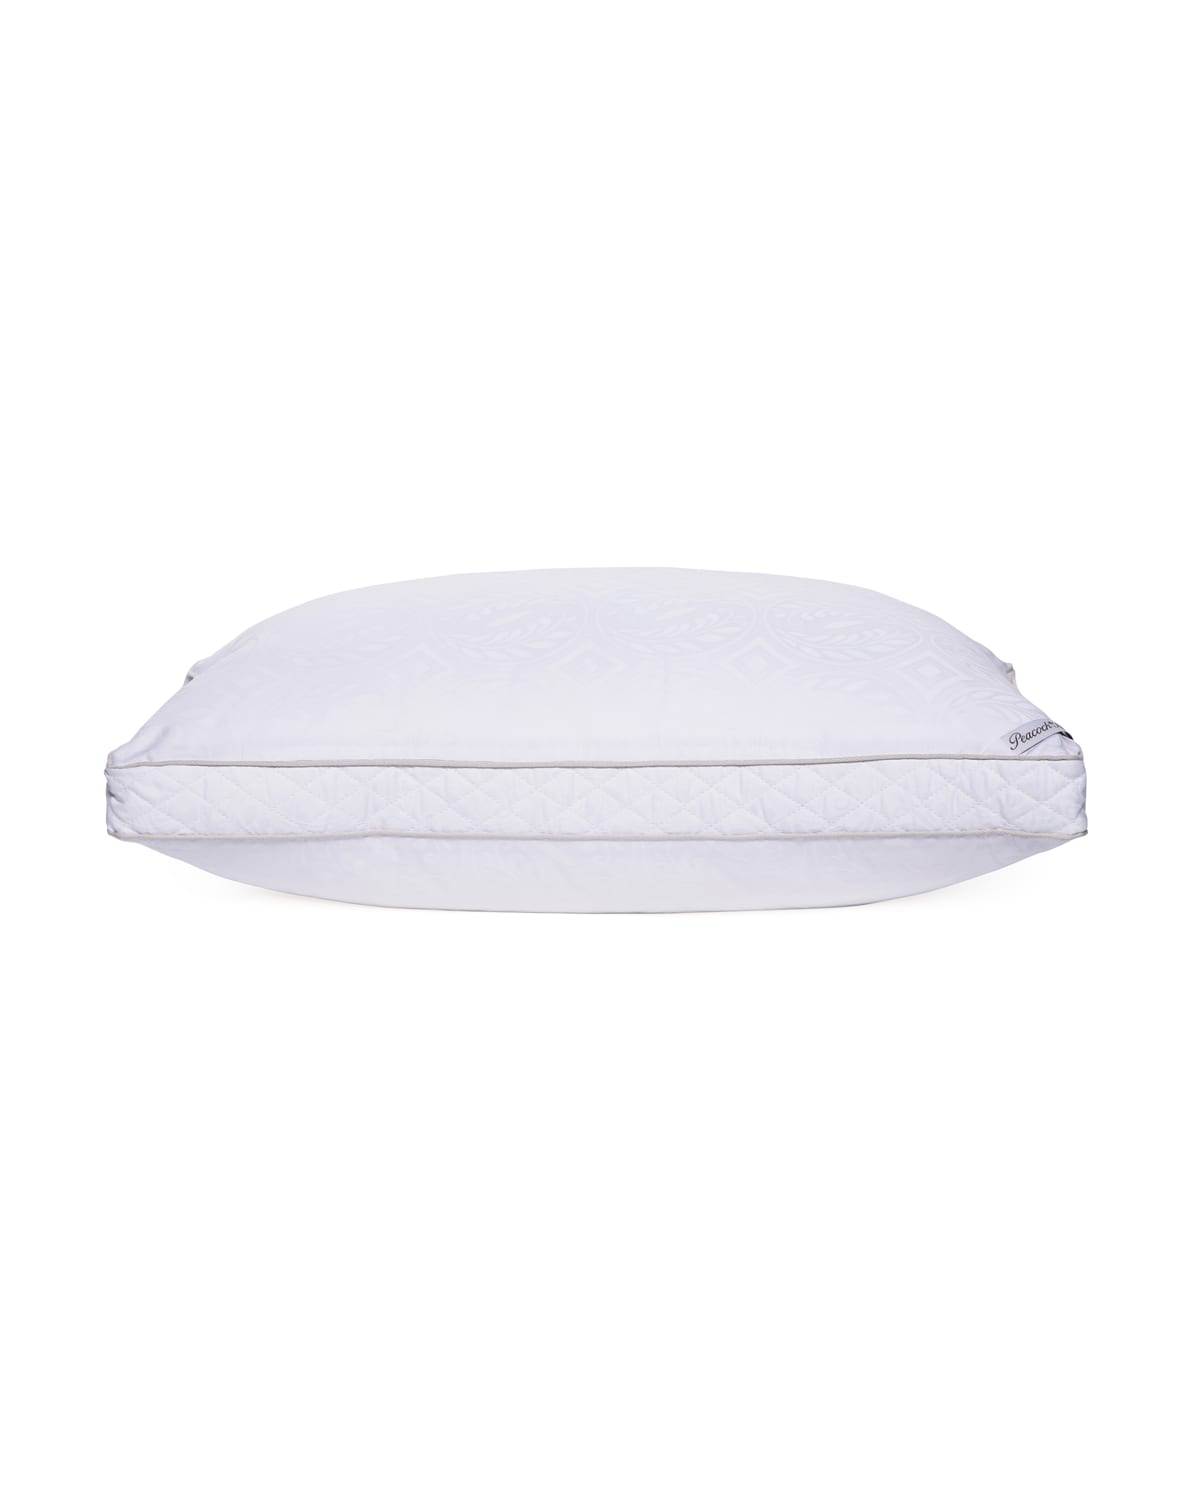 Image Peacock Alley Standard Down Alternative Pillow, Firm